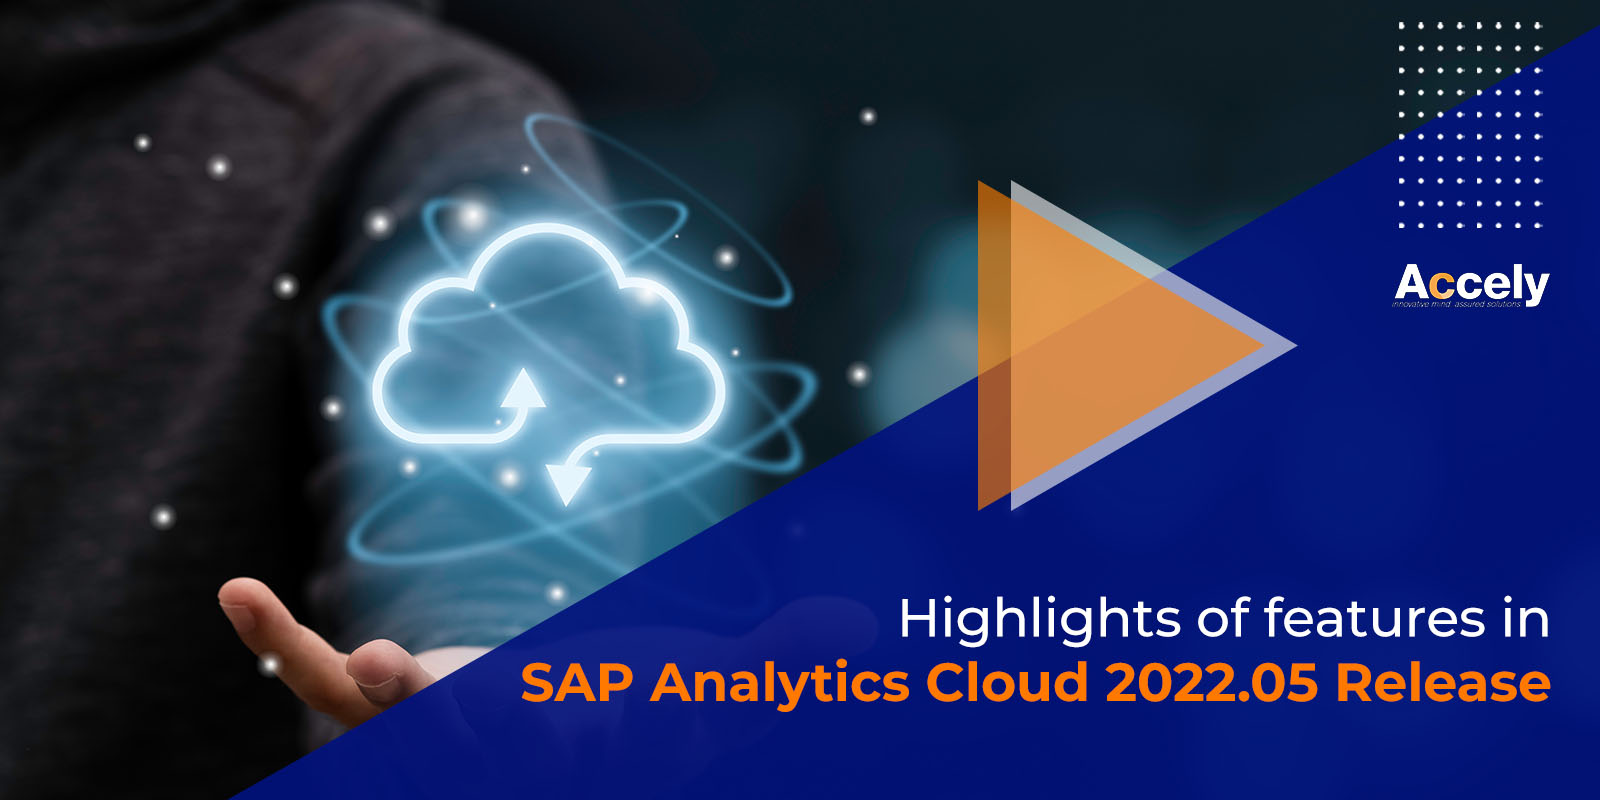 Highlights of features in SAP Analytics Cloud 2022.05 Release